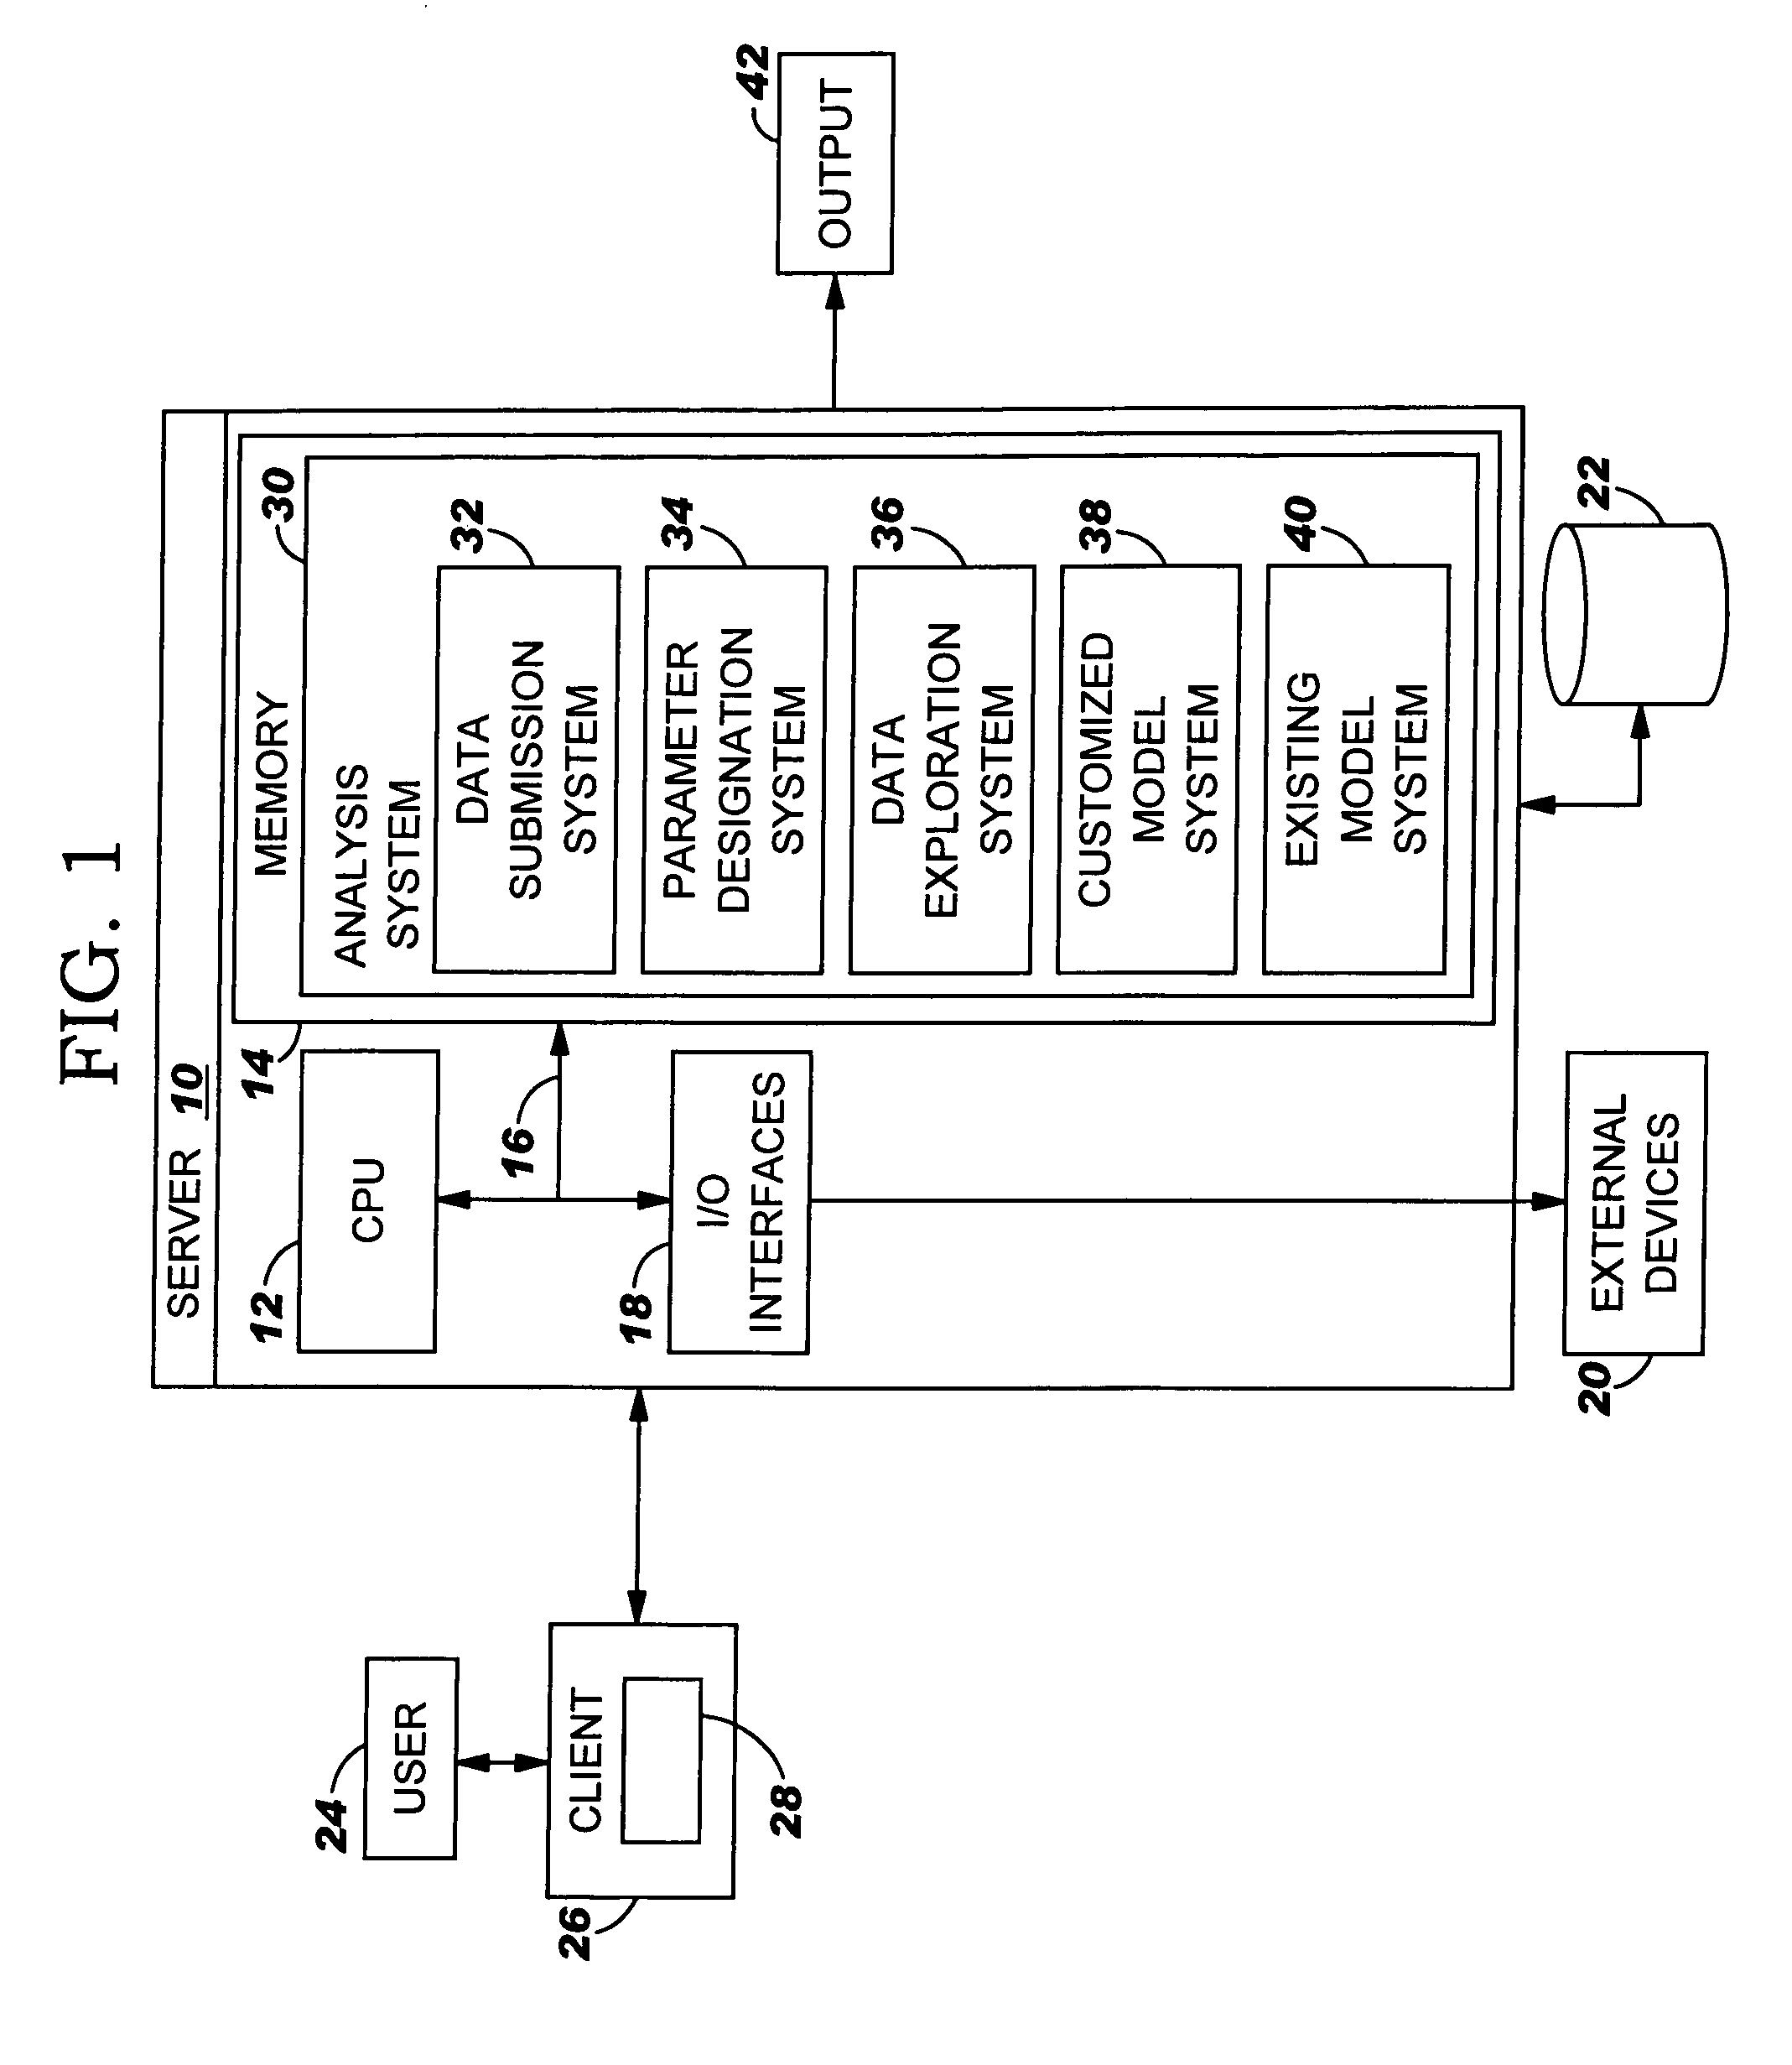 Computerized data mining system, method and program product